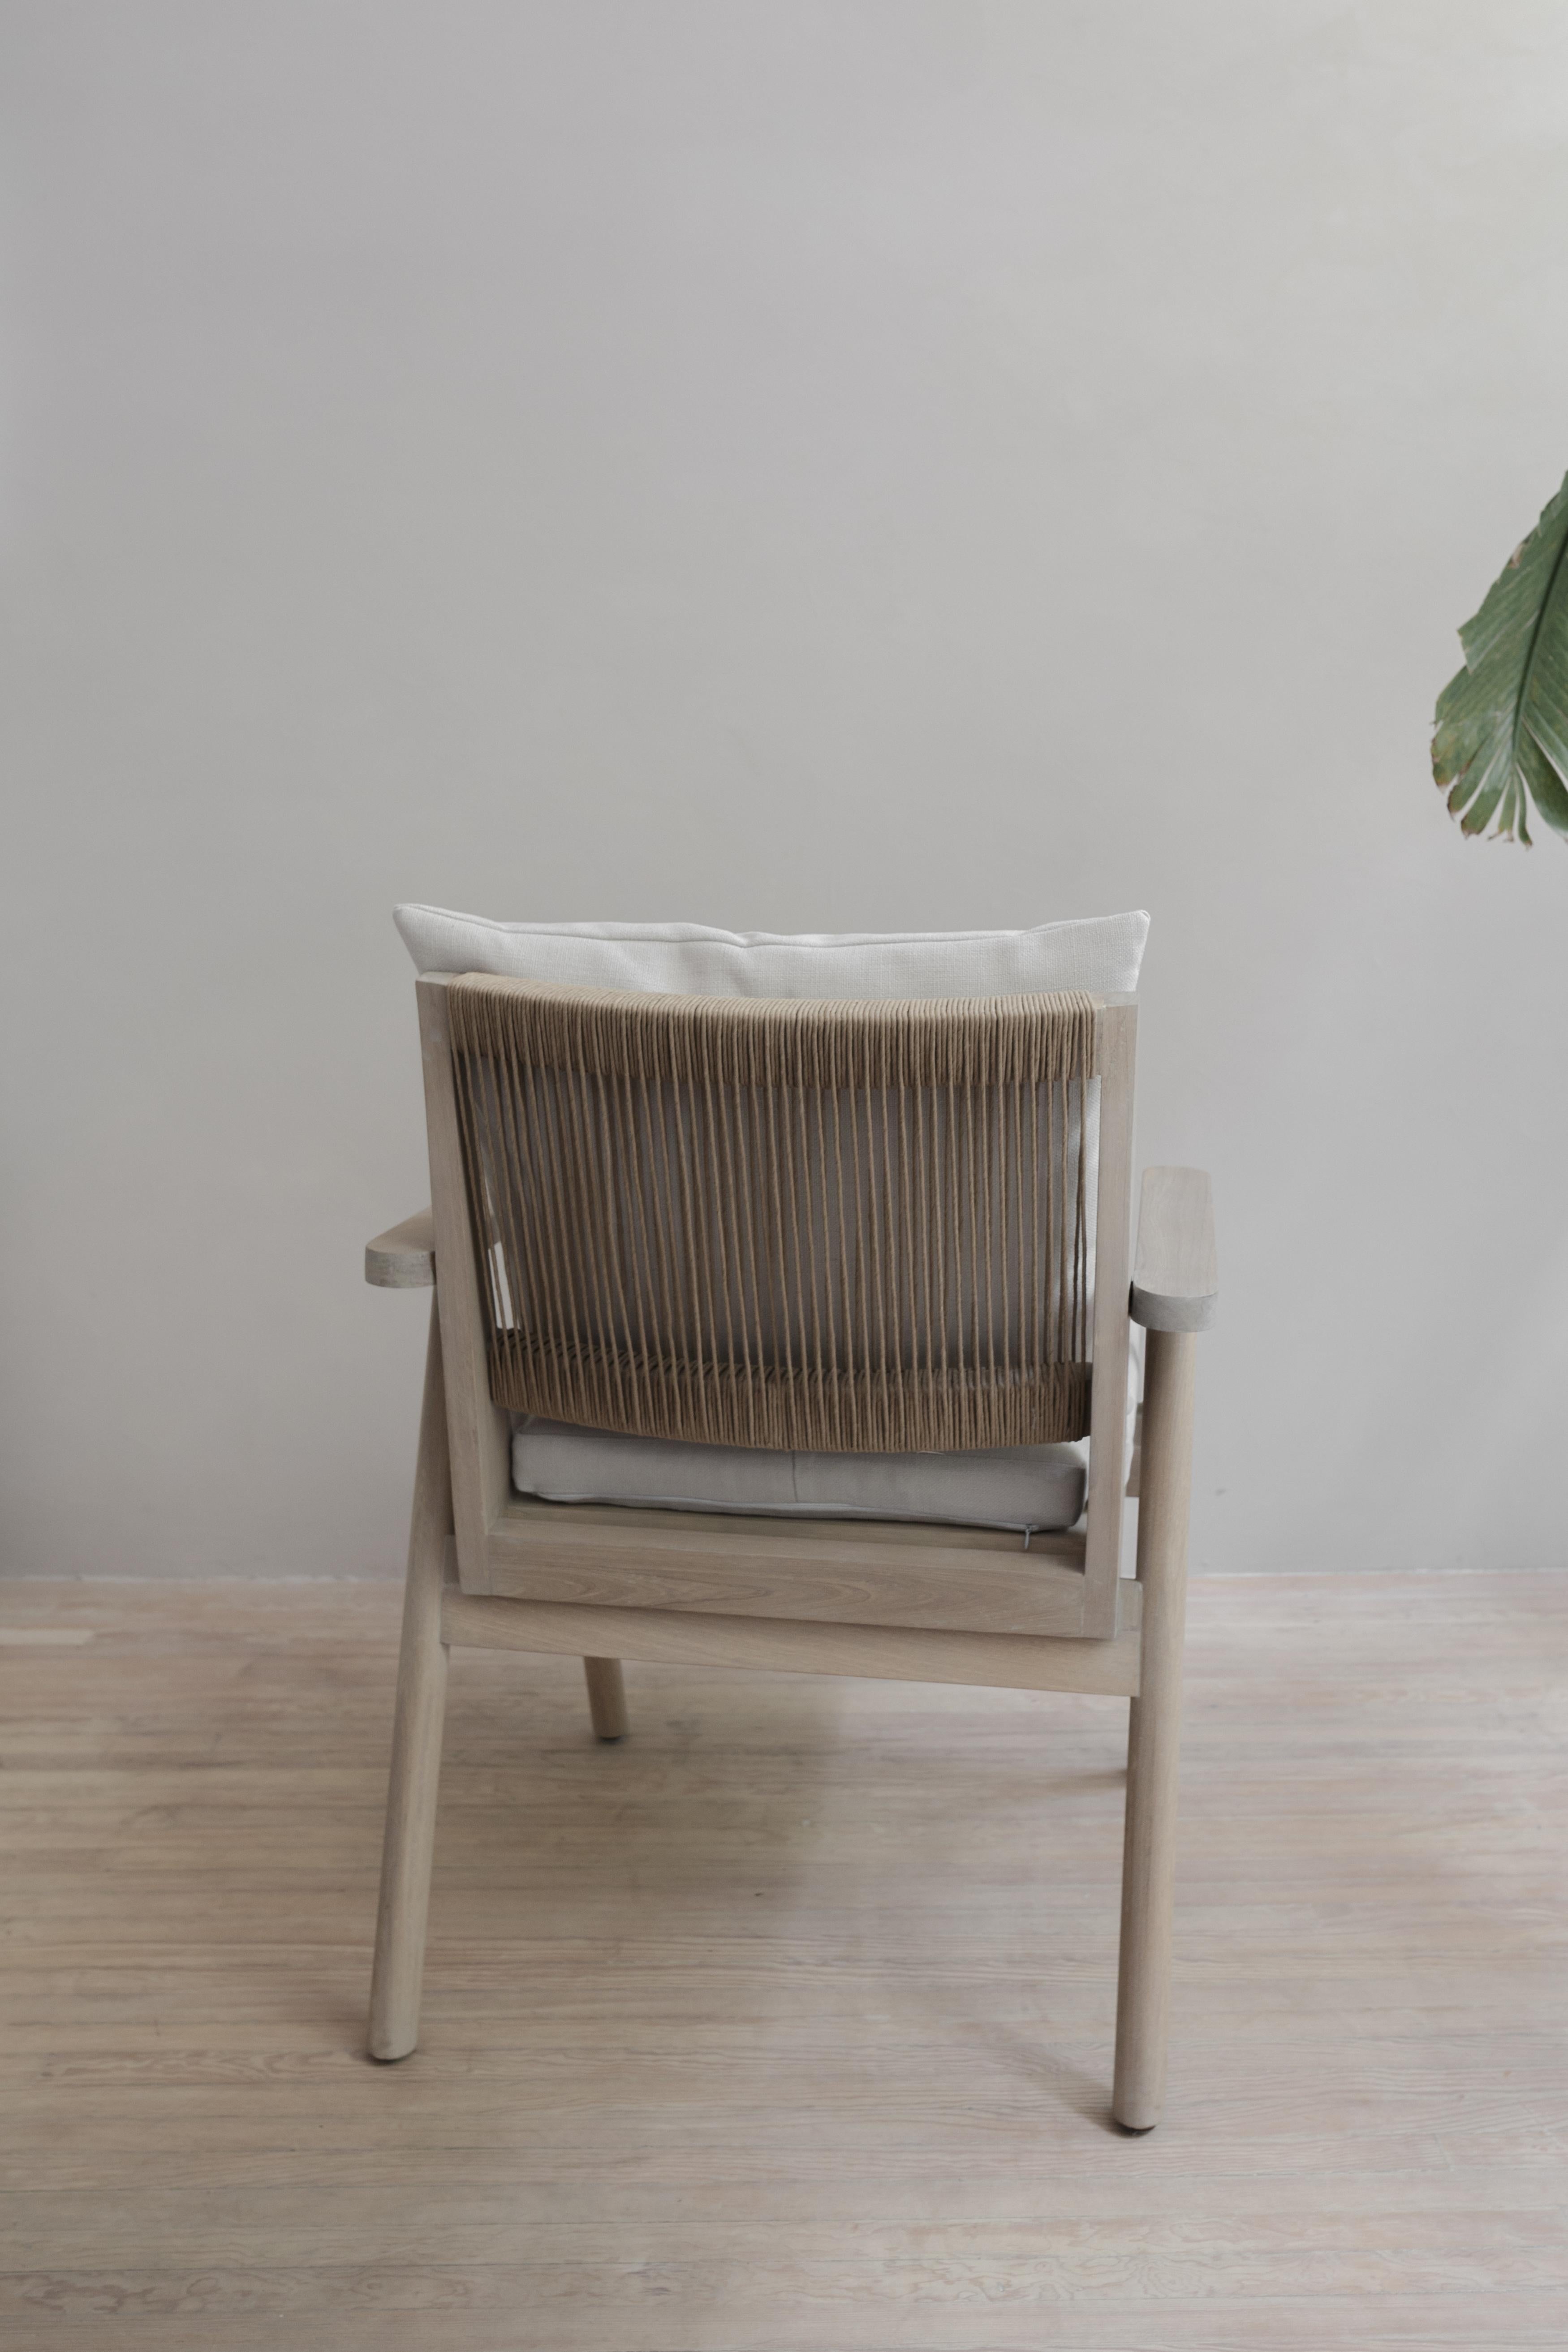 Hand-Crafted Hala Wood Chair For Sale